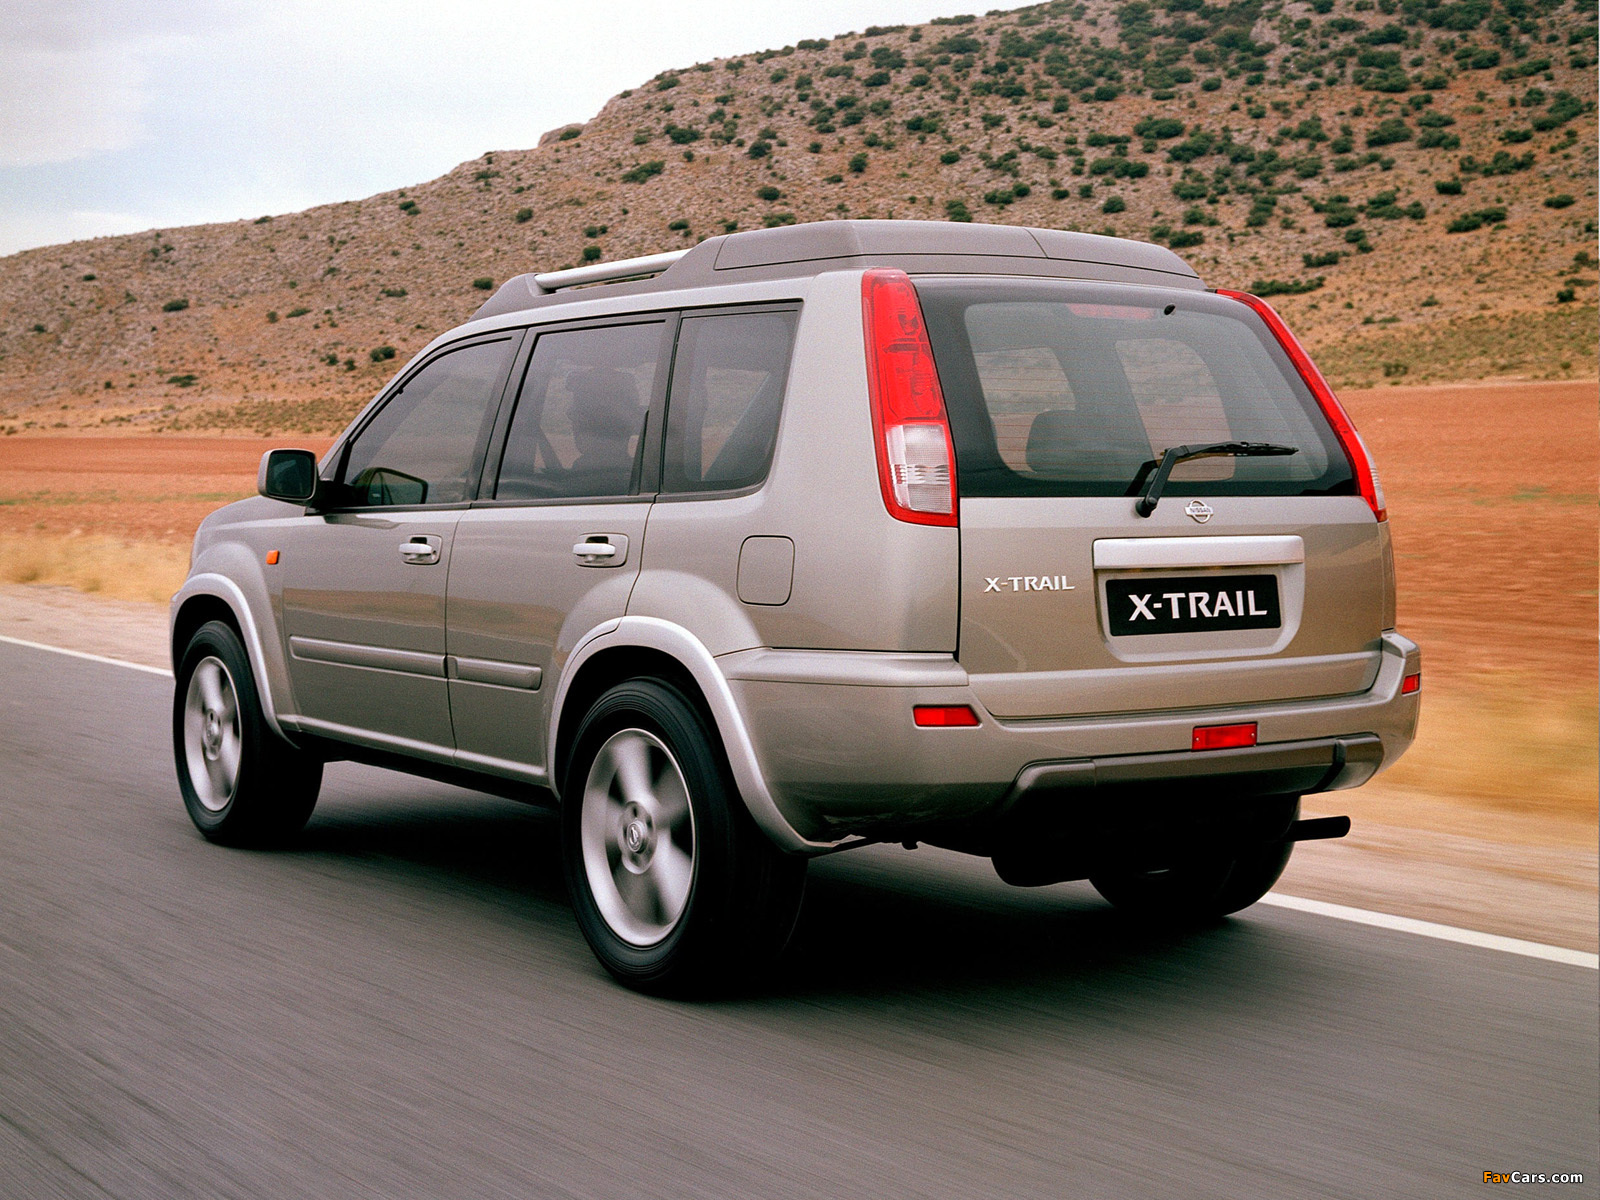 Nissan XTrail (T30) 200104 pictures (1600x1200)